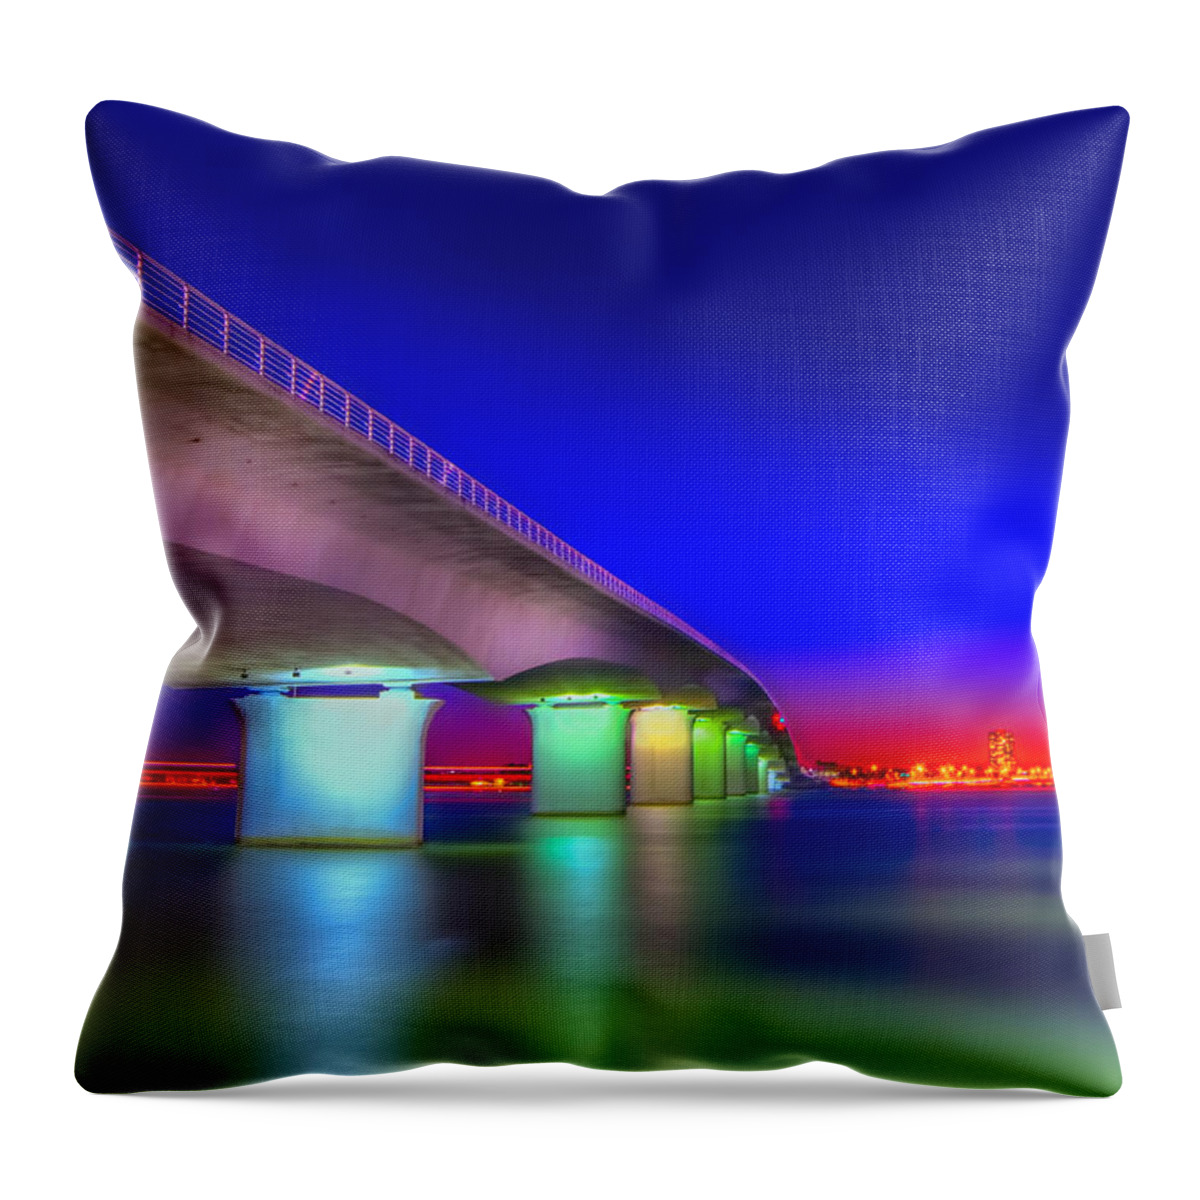 Ringling Bridge Throw Pillow featuring the photograph Ringling Bridge by Marvin Spates